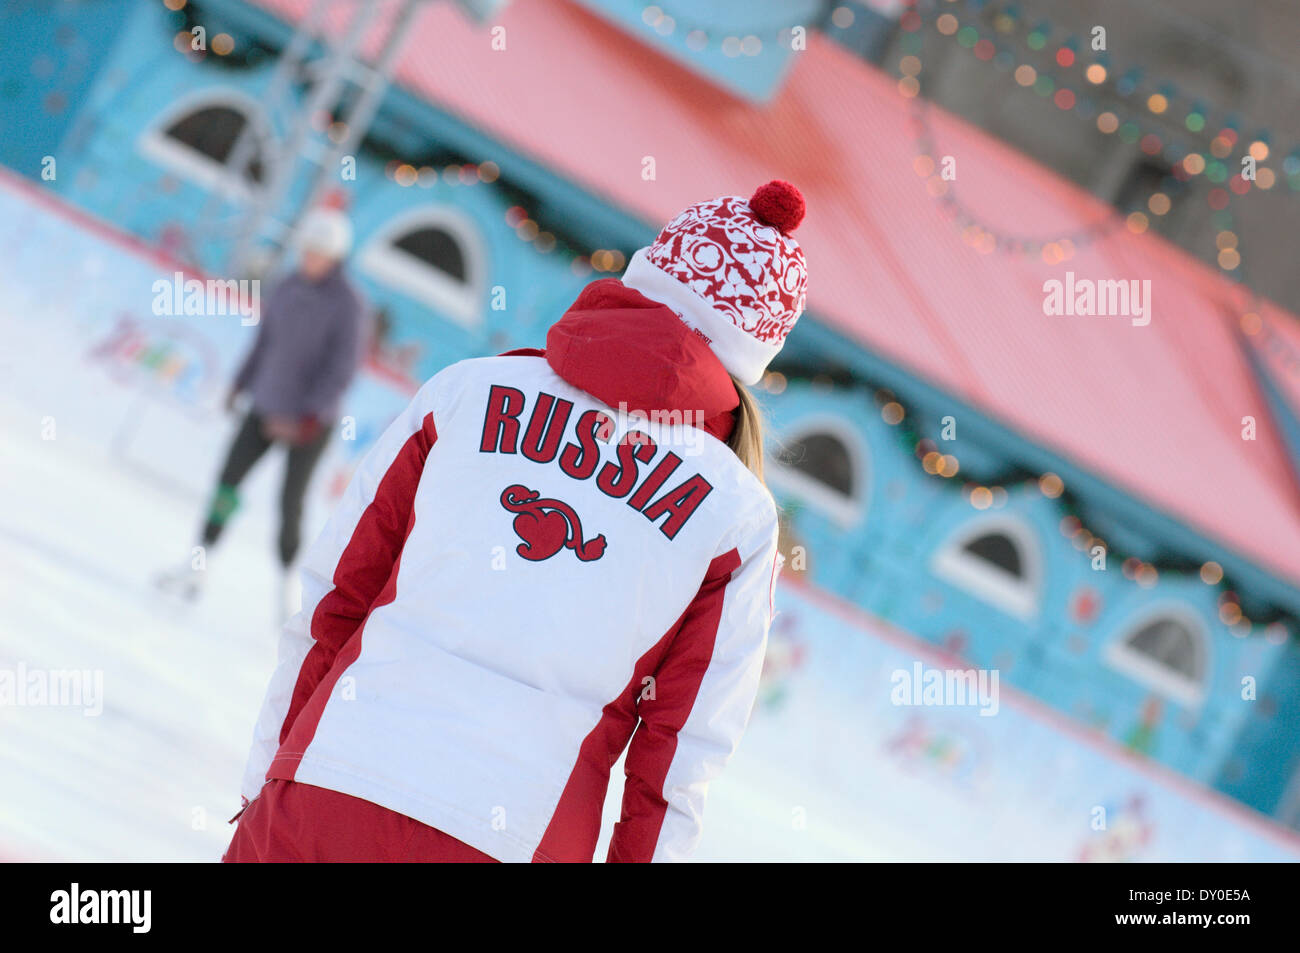 Russian Ice Skating team member in Red Square. Stock Photo